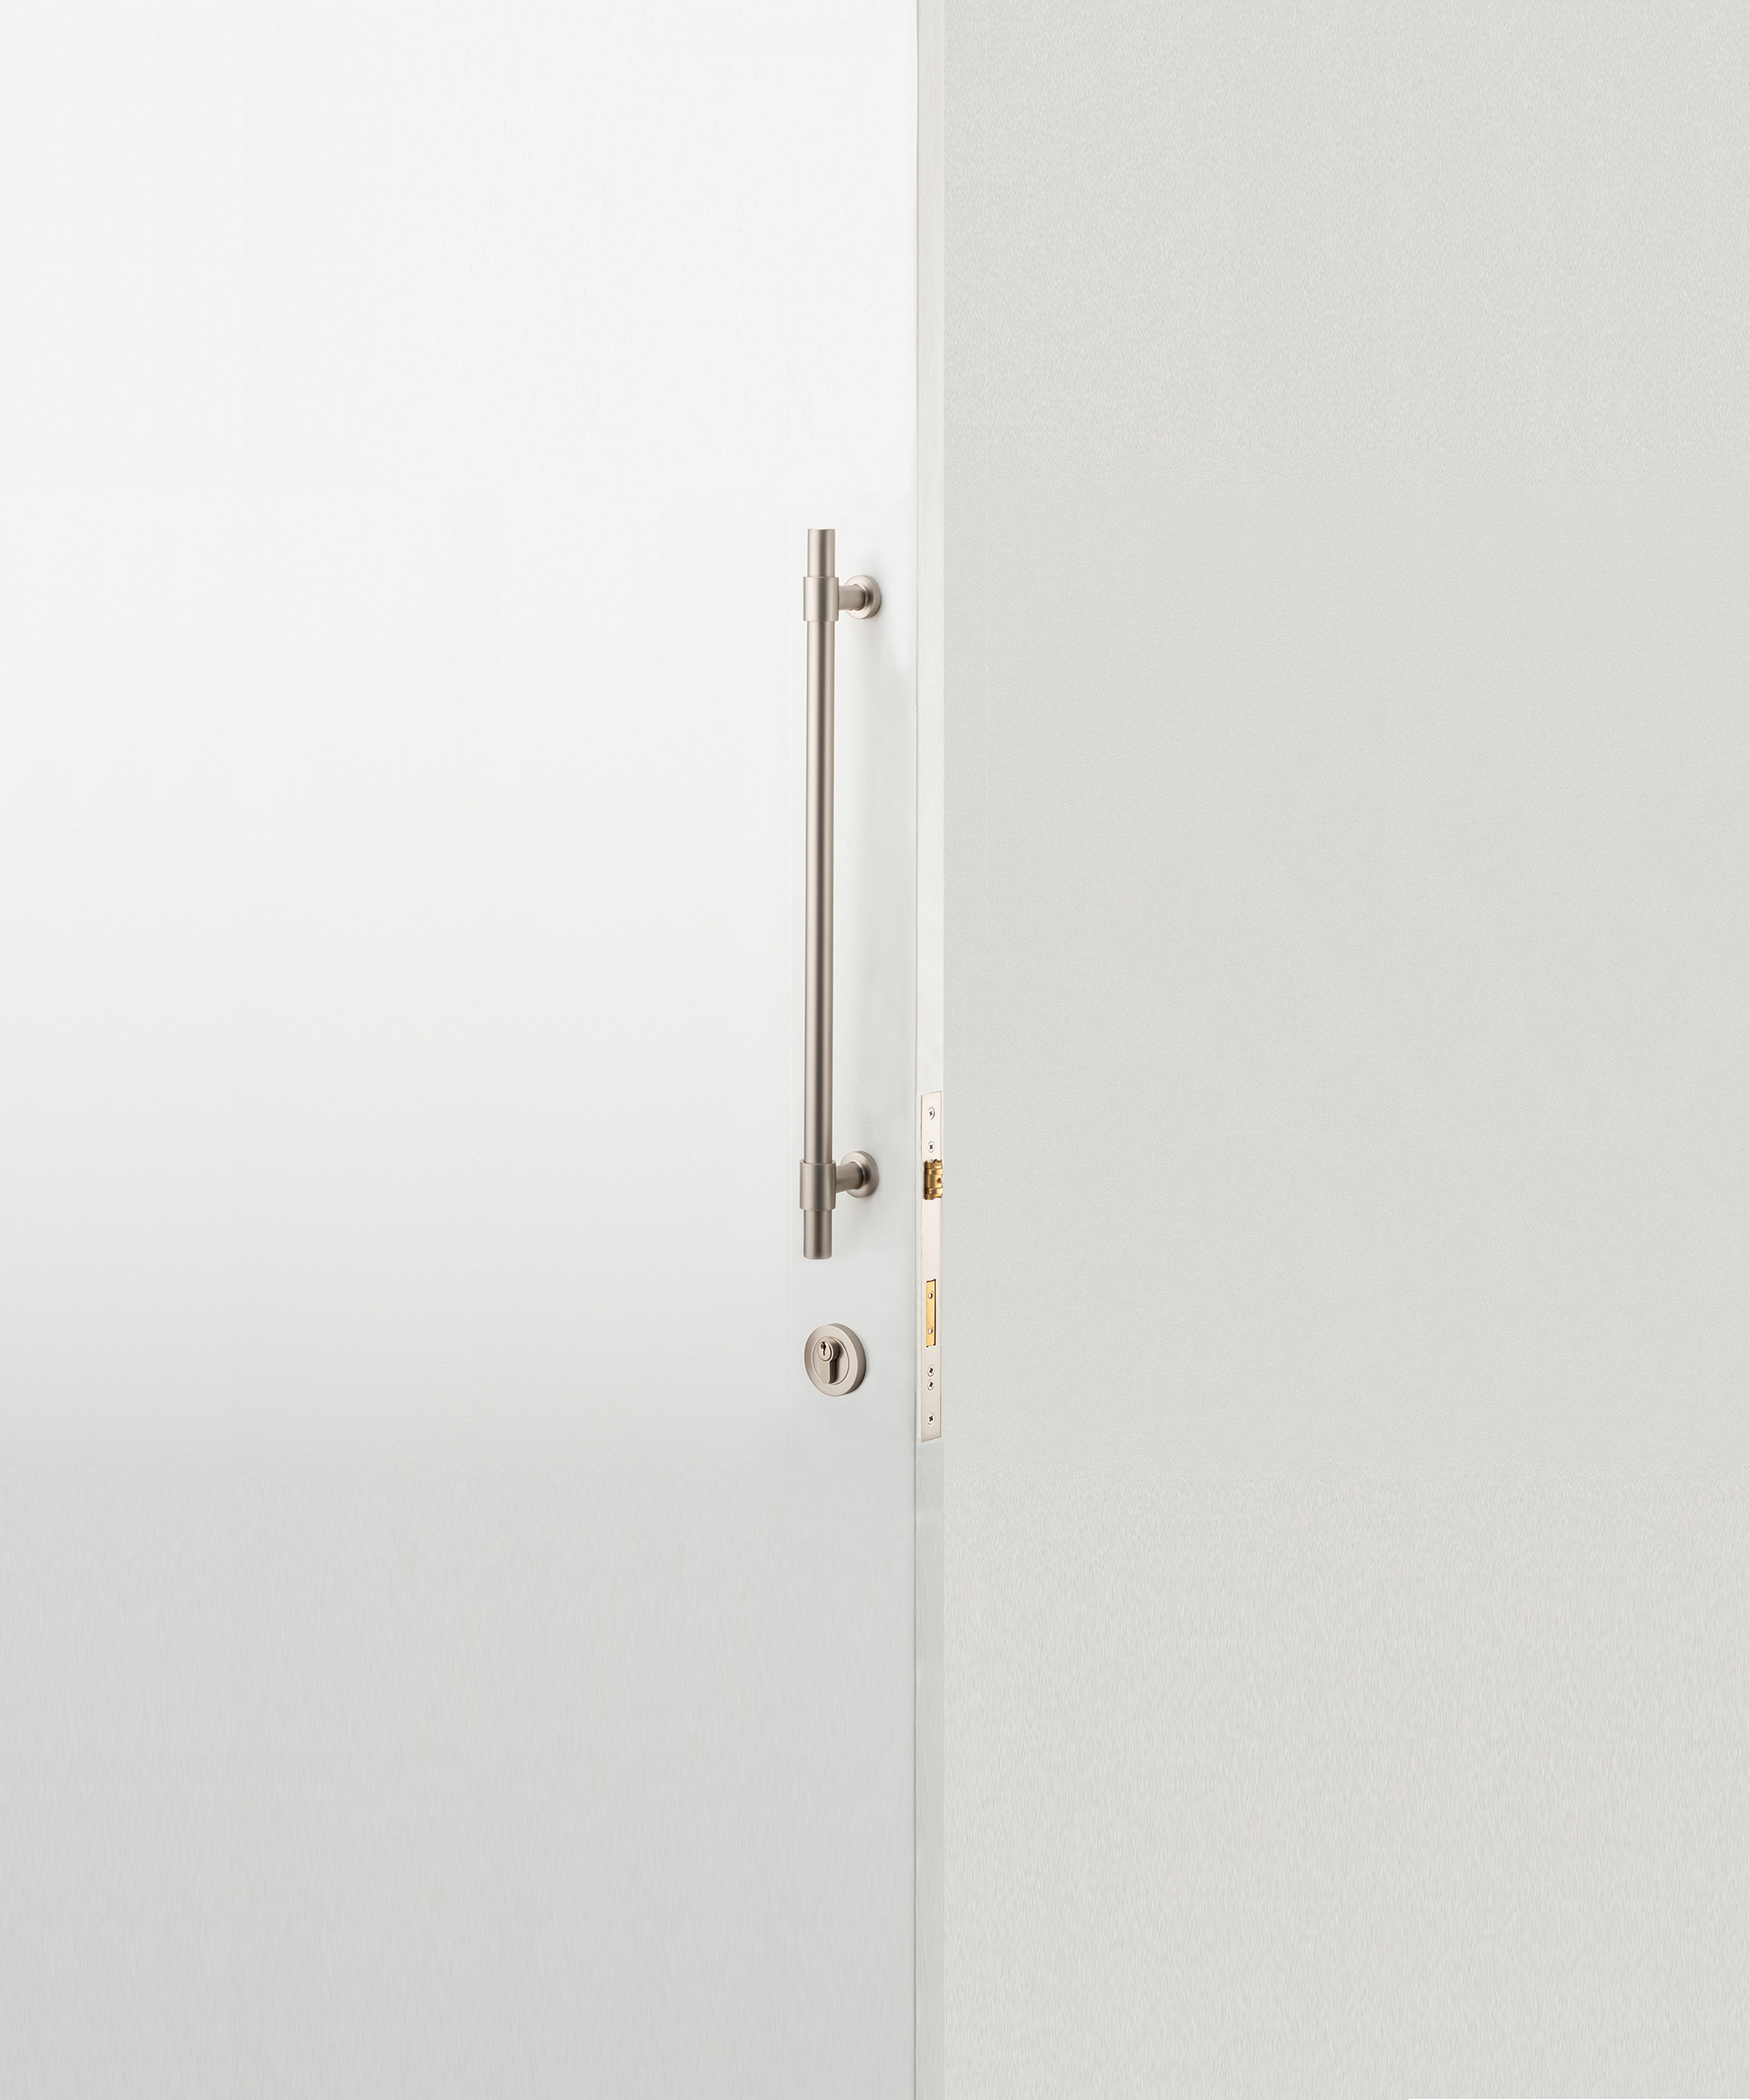 9444KENTR60KK - Berlin Pull Handle - 450mm Entrance Kit with Separate High Security Lock - Polished Chrome - Entrance